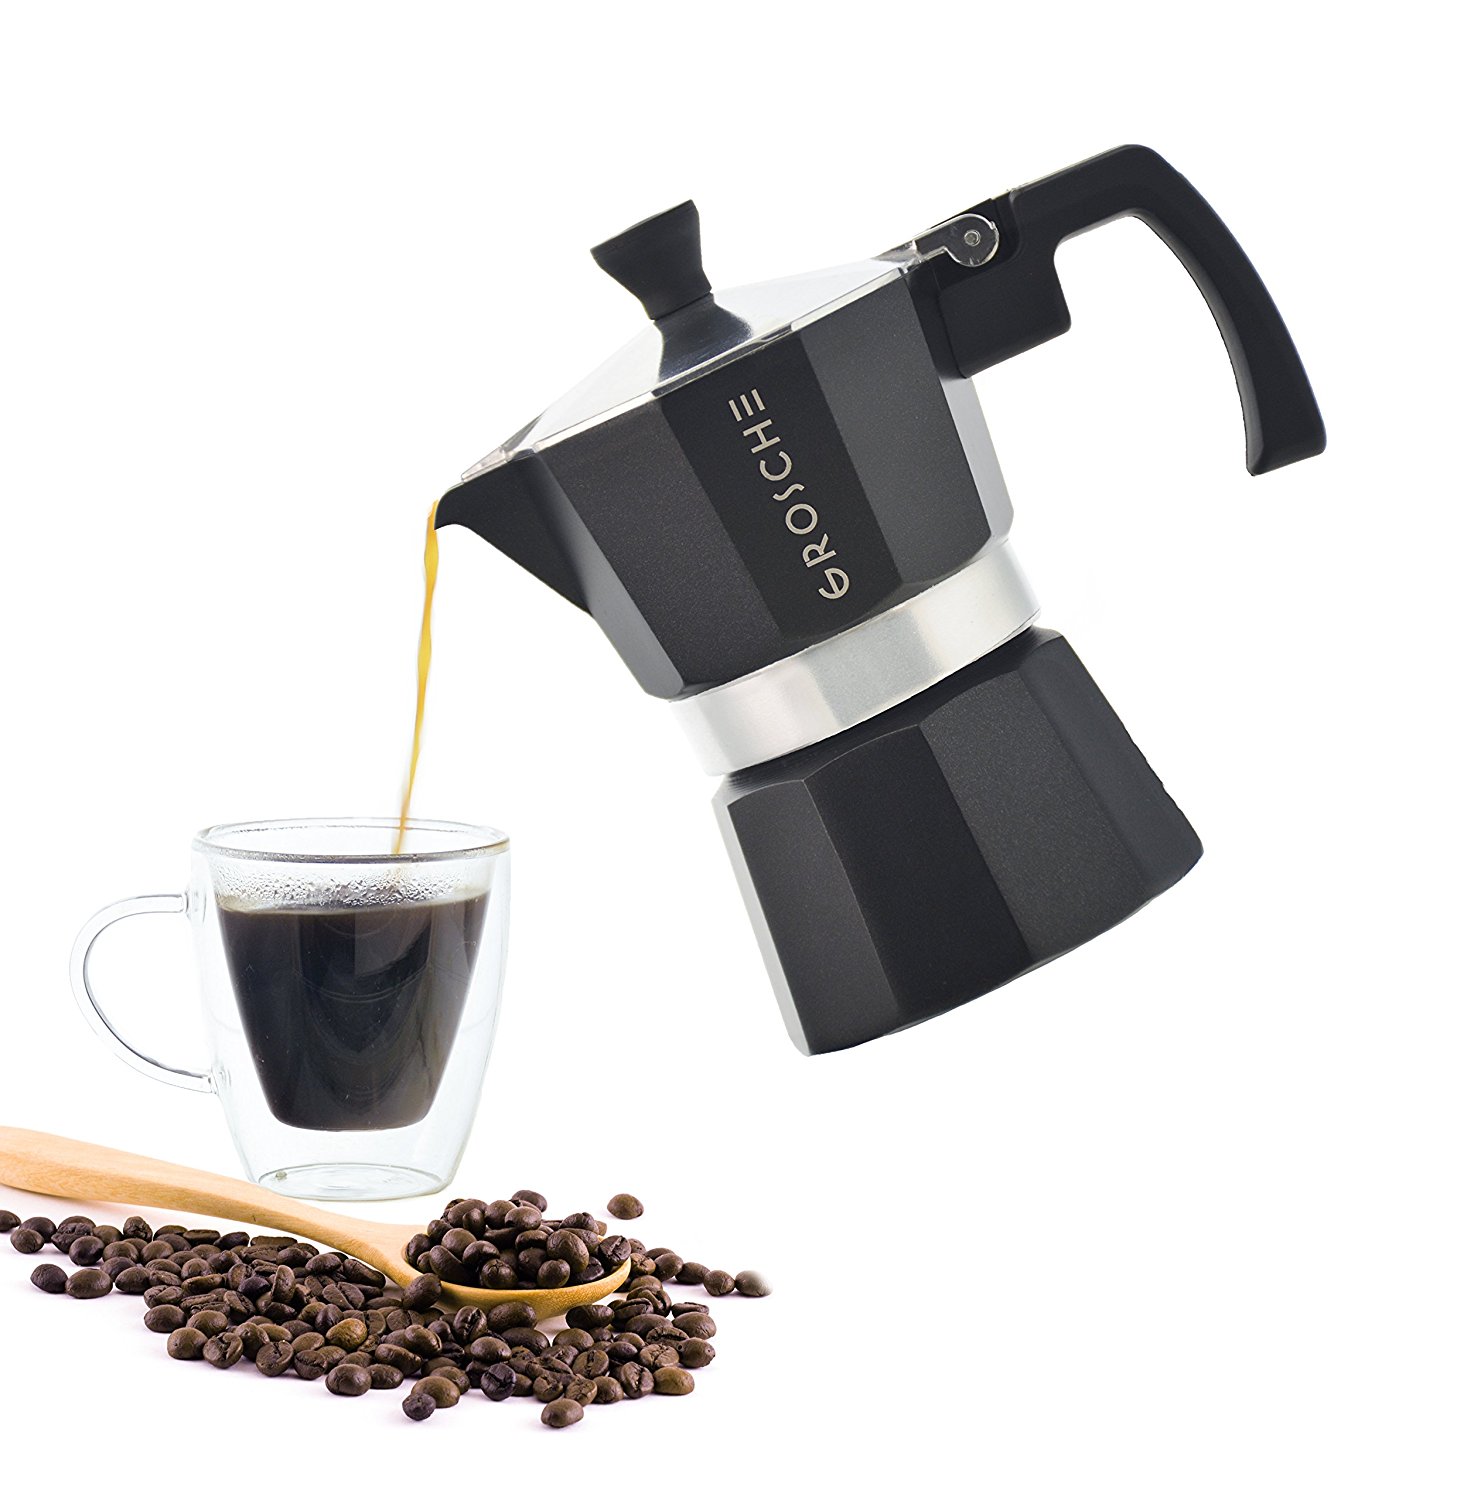 Grosche Milano Stovetop Espresso Maker pouring coffee, and a spoon with coffee beans